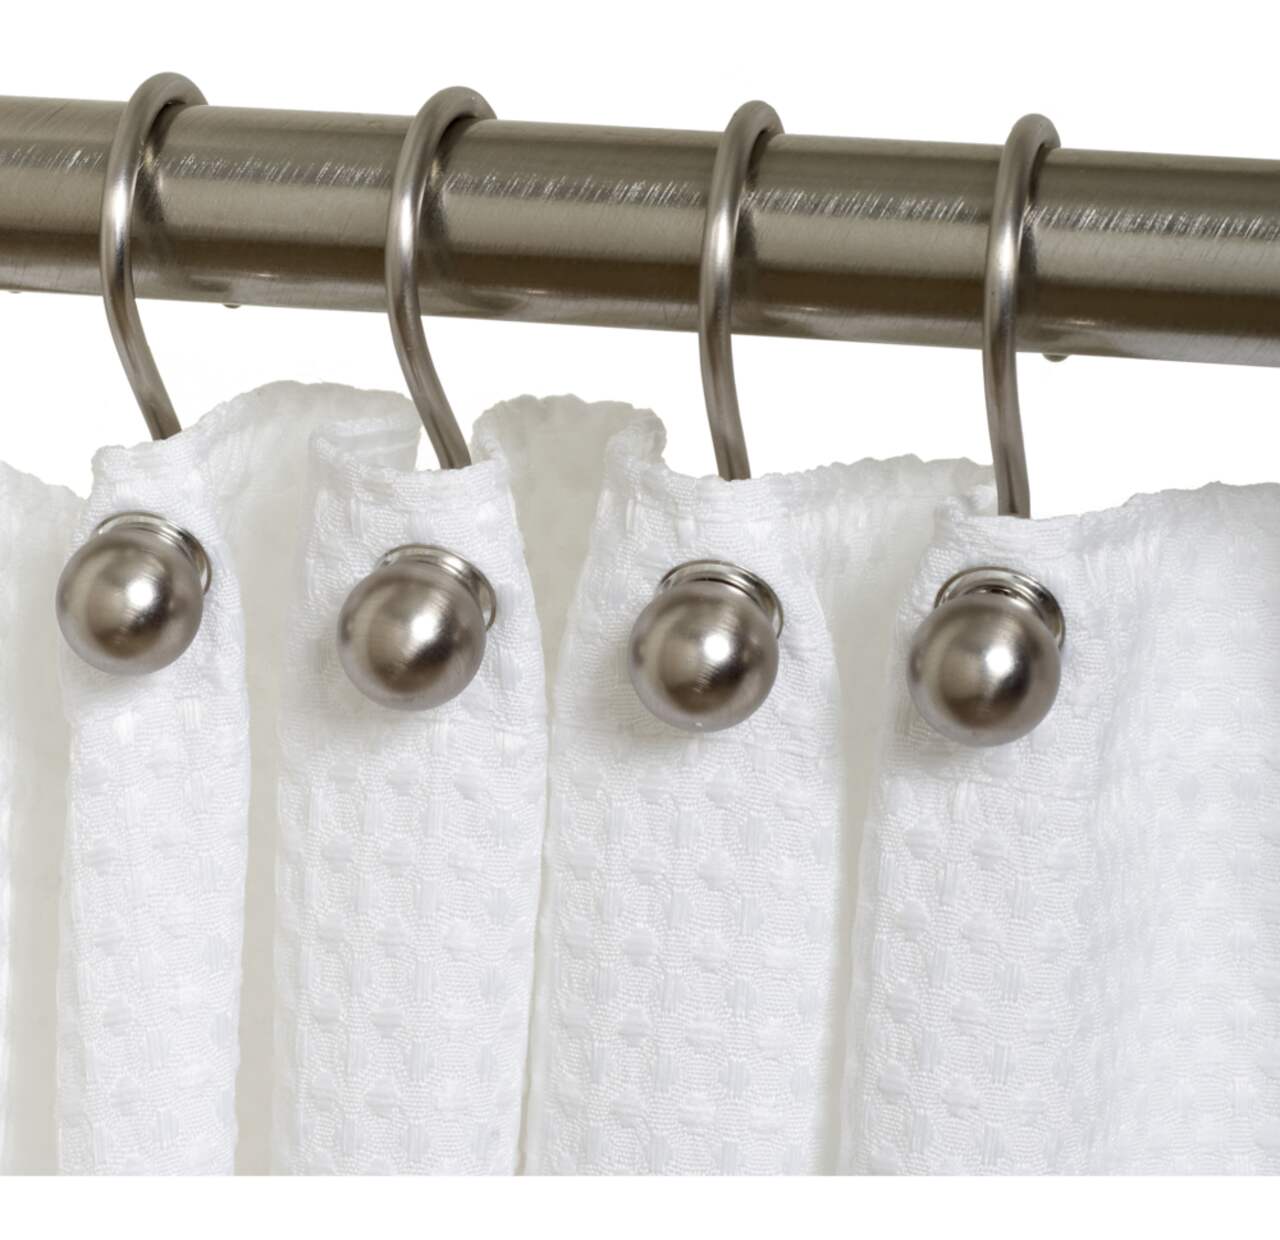 For Living Decorative Ball Rust-Resistant Shower Curtain Metal